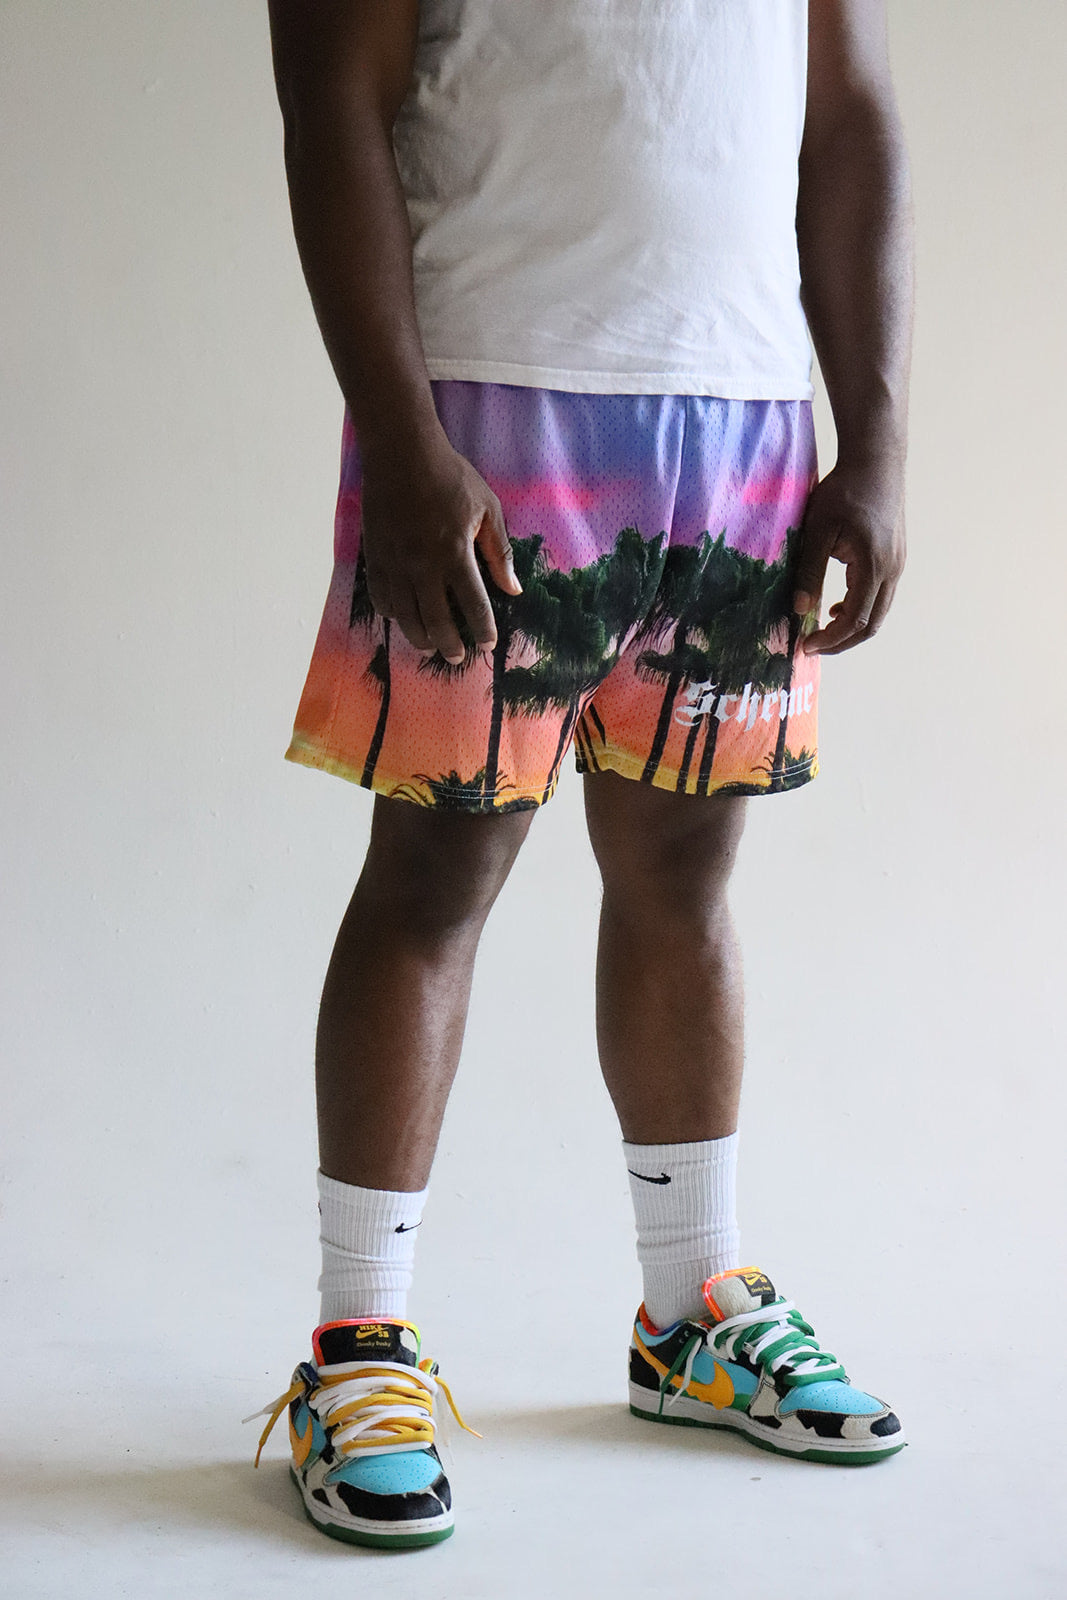 Men's graphic mesh shorts with a picture of palm trees